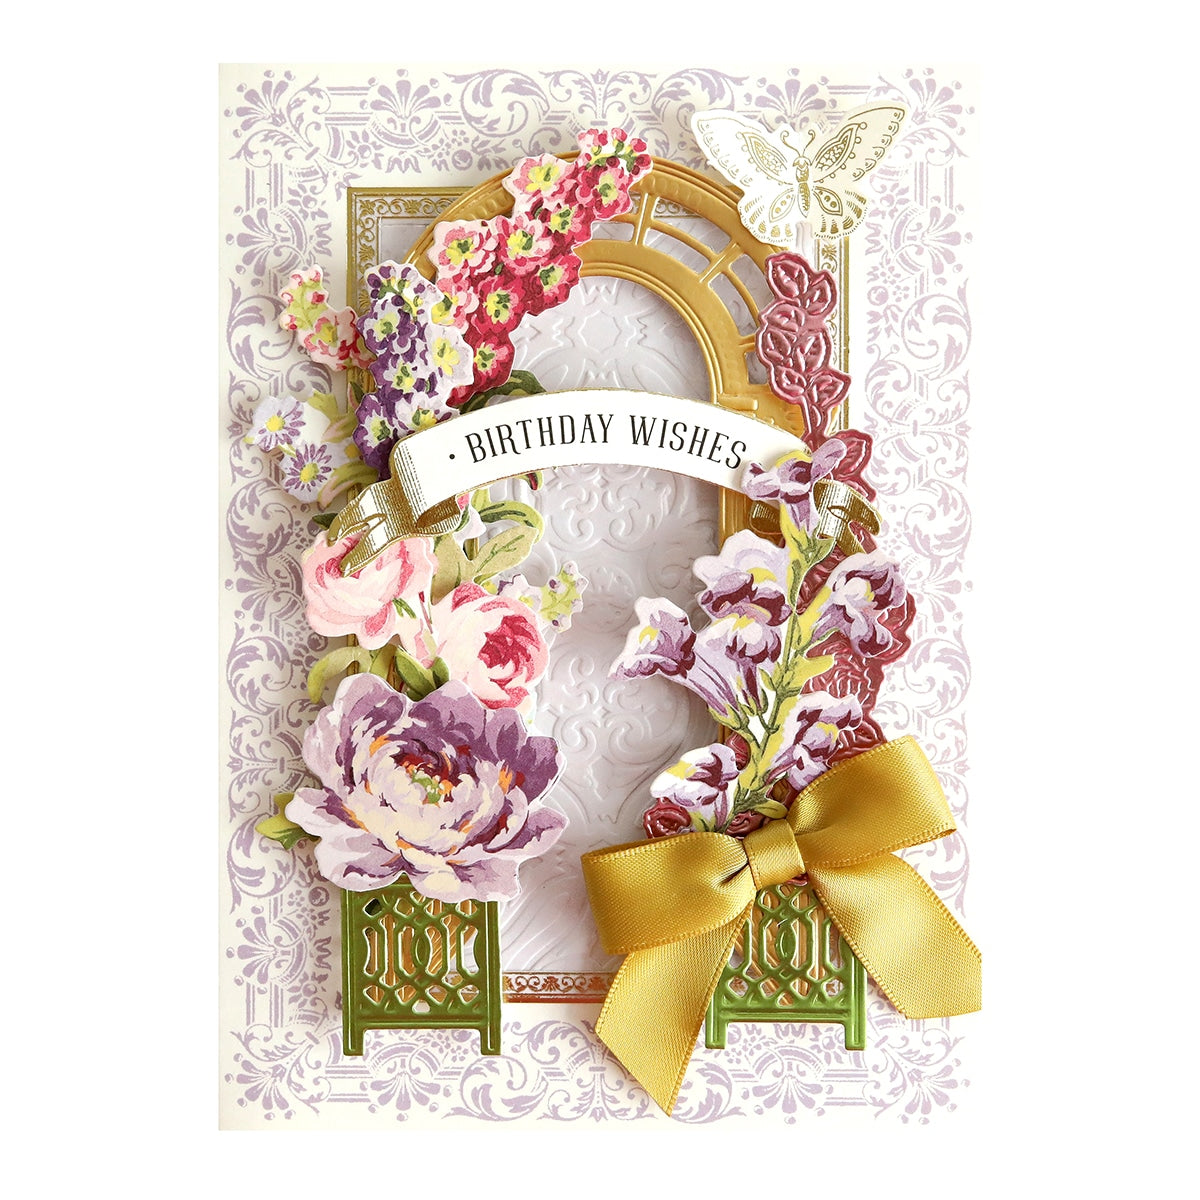 a Birthday Wishes Card Making Kit with flowers and a bow.